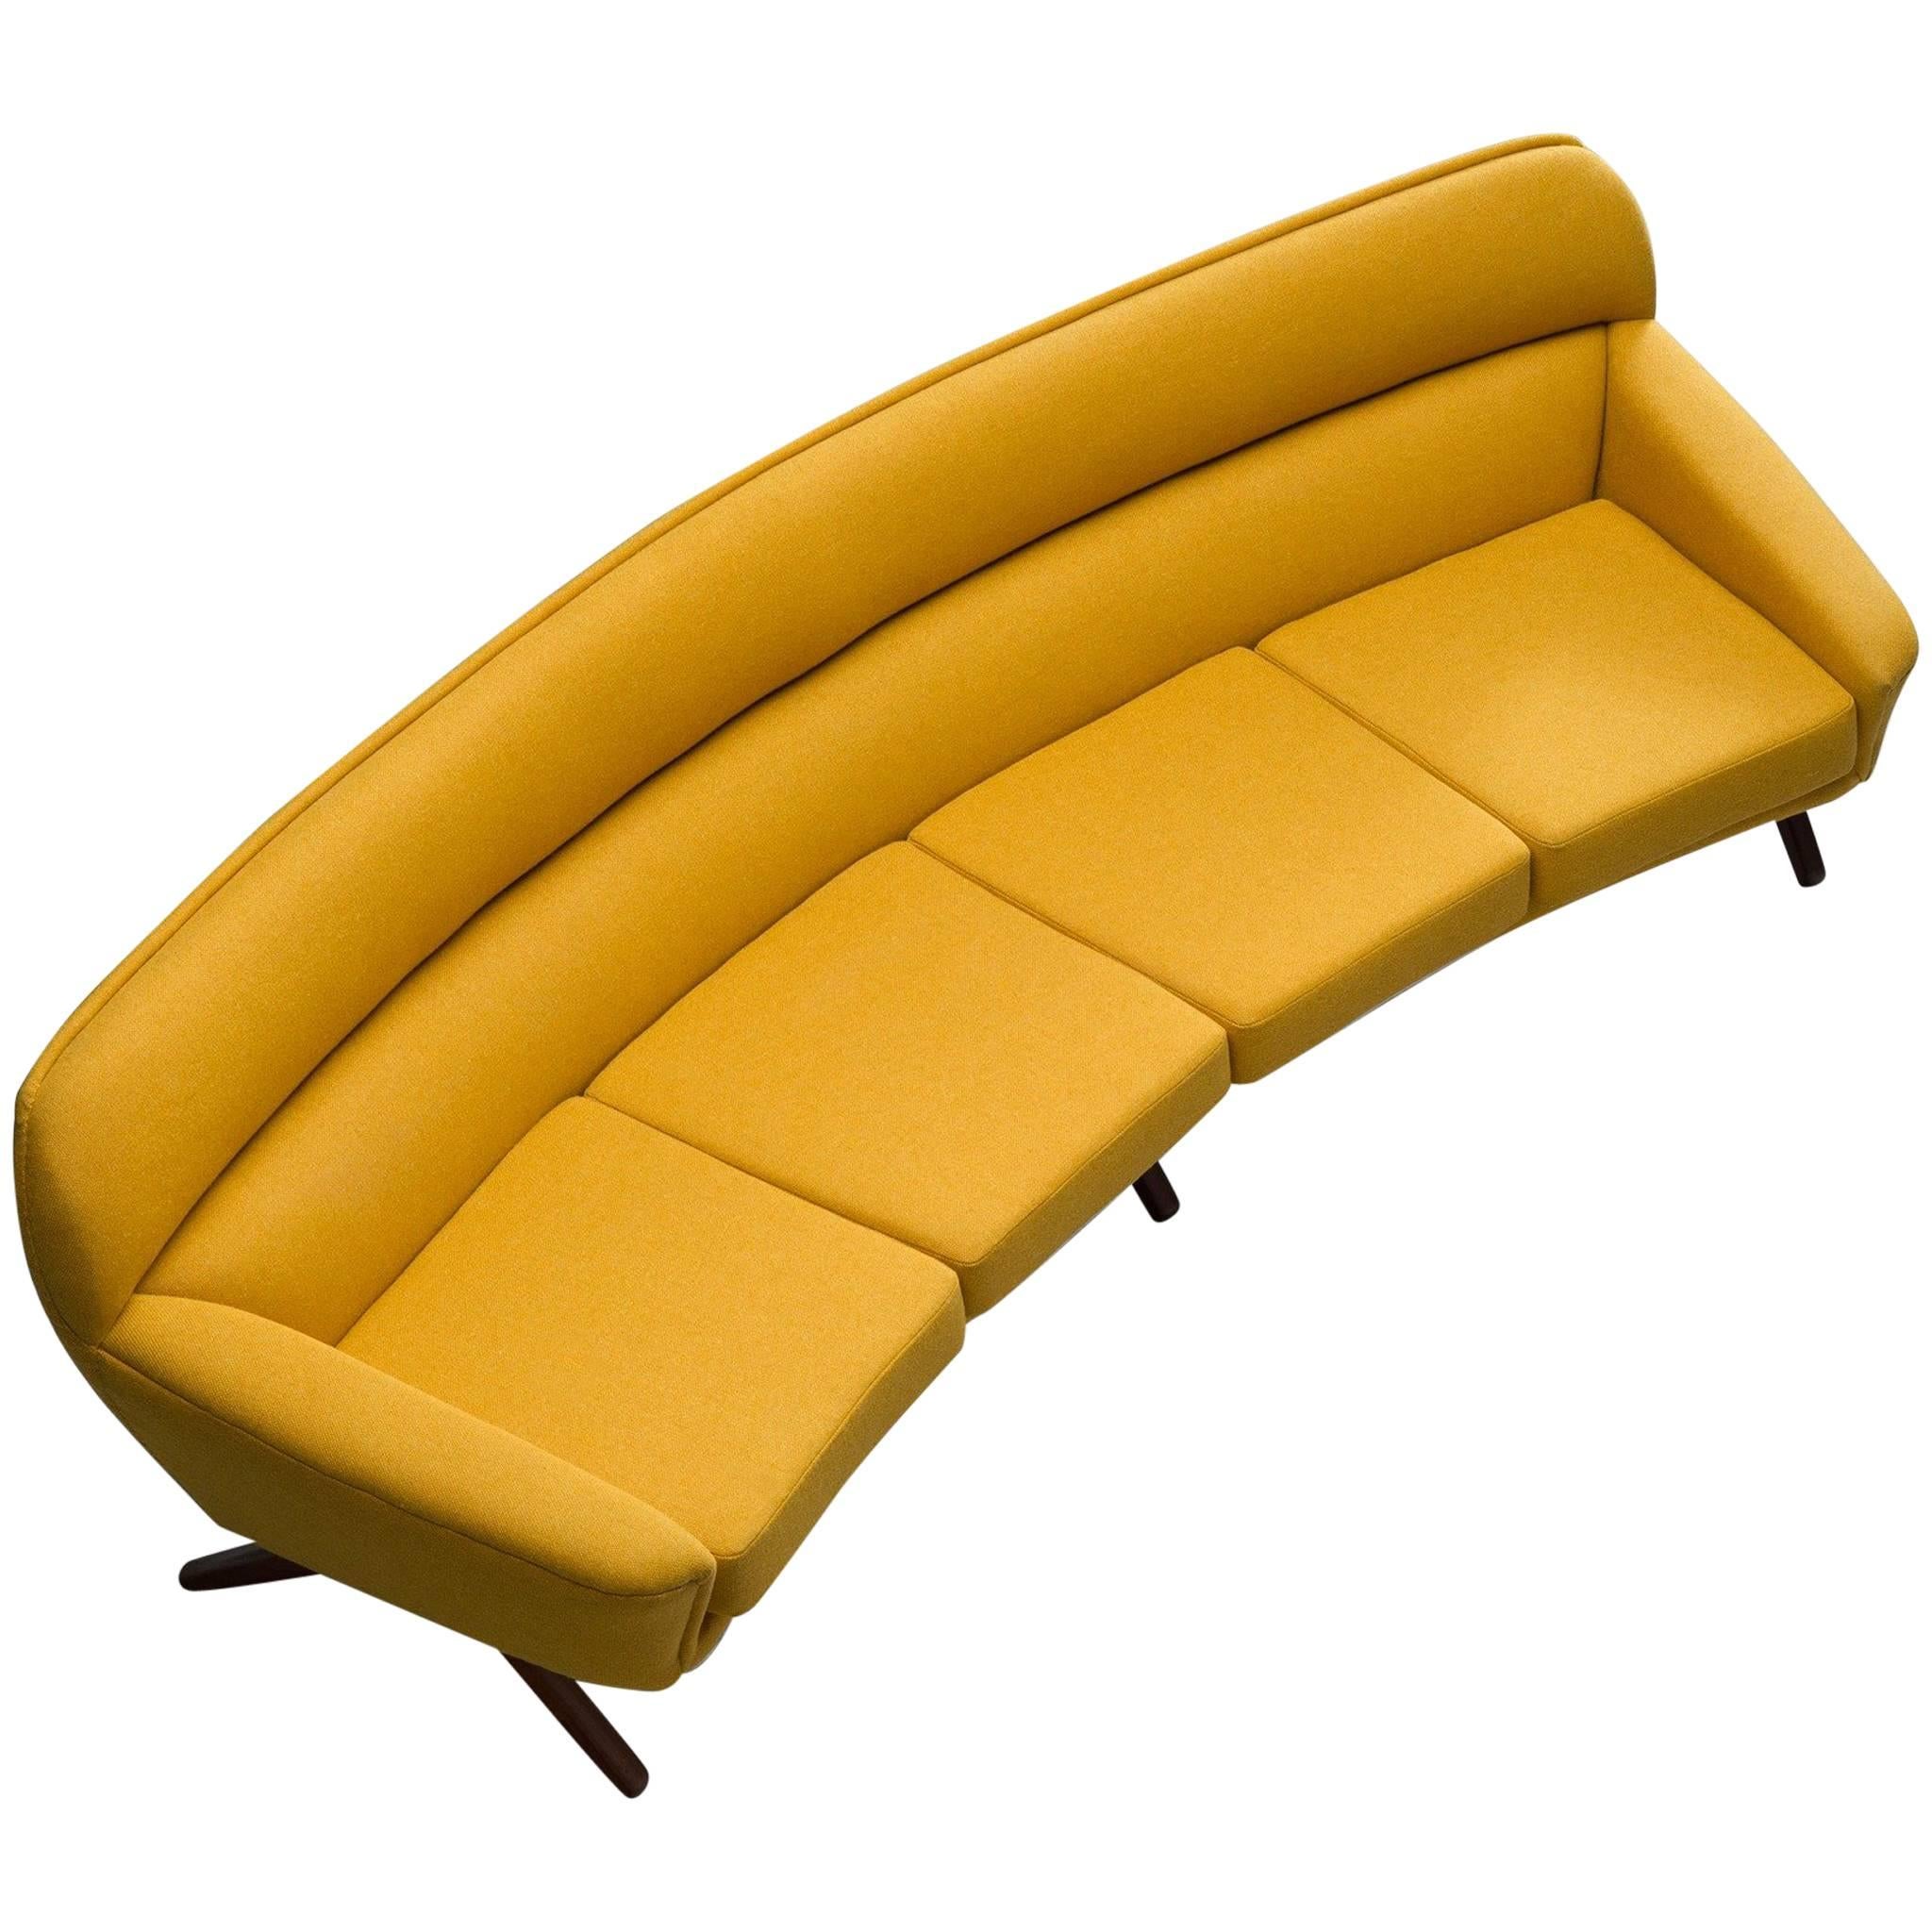 Reupholstered Curved Sofa by Leif Hansen, Denmark